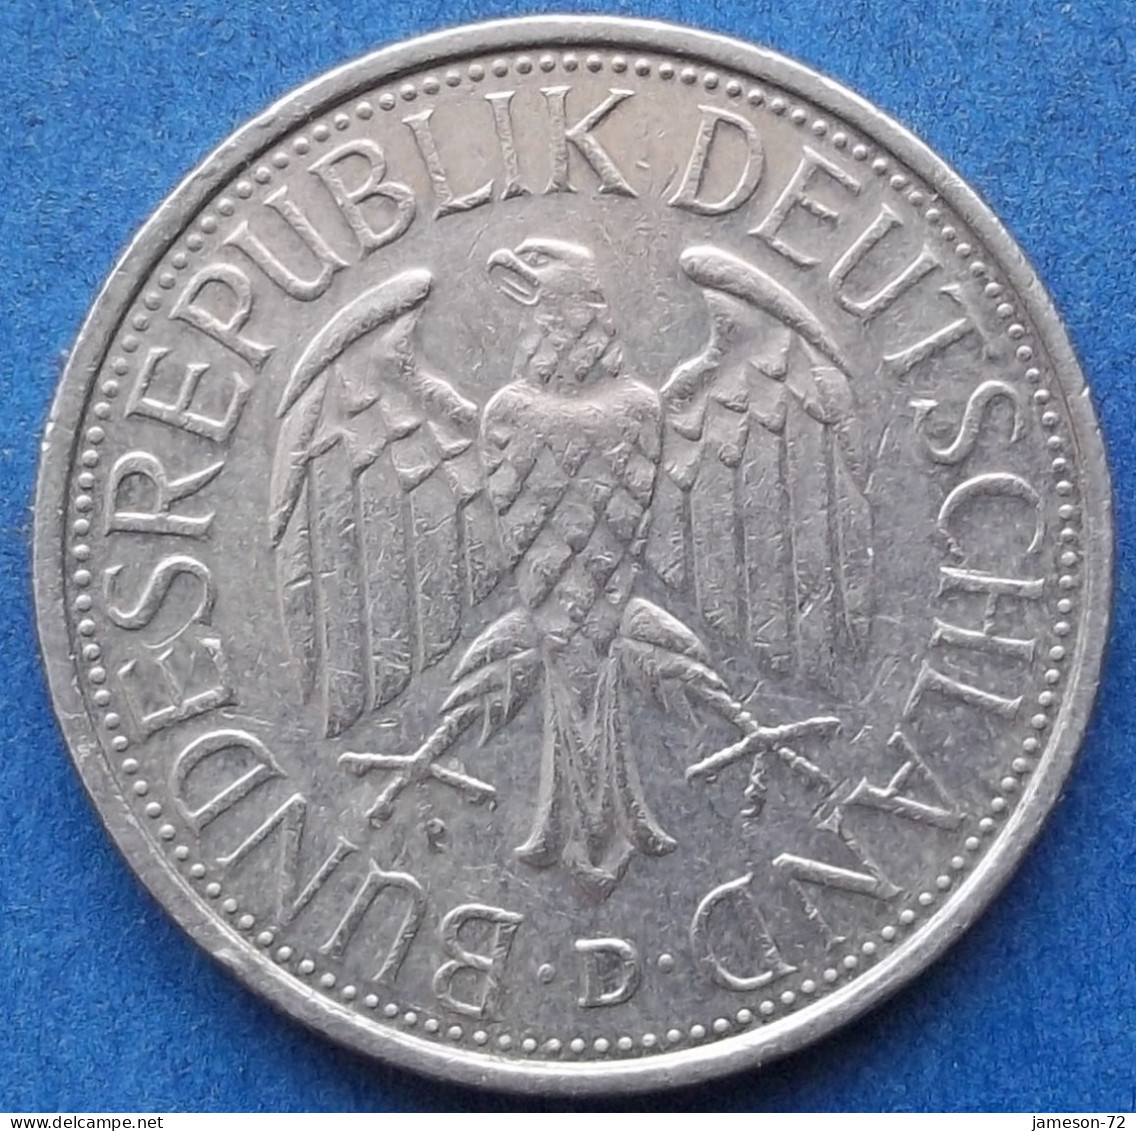 GERMANY - 1 Mark 1988 D KM# 110 Federal Republic Mark Coinage (1946-2002) - Edelweiss Coins - 1 Mark